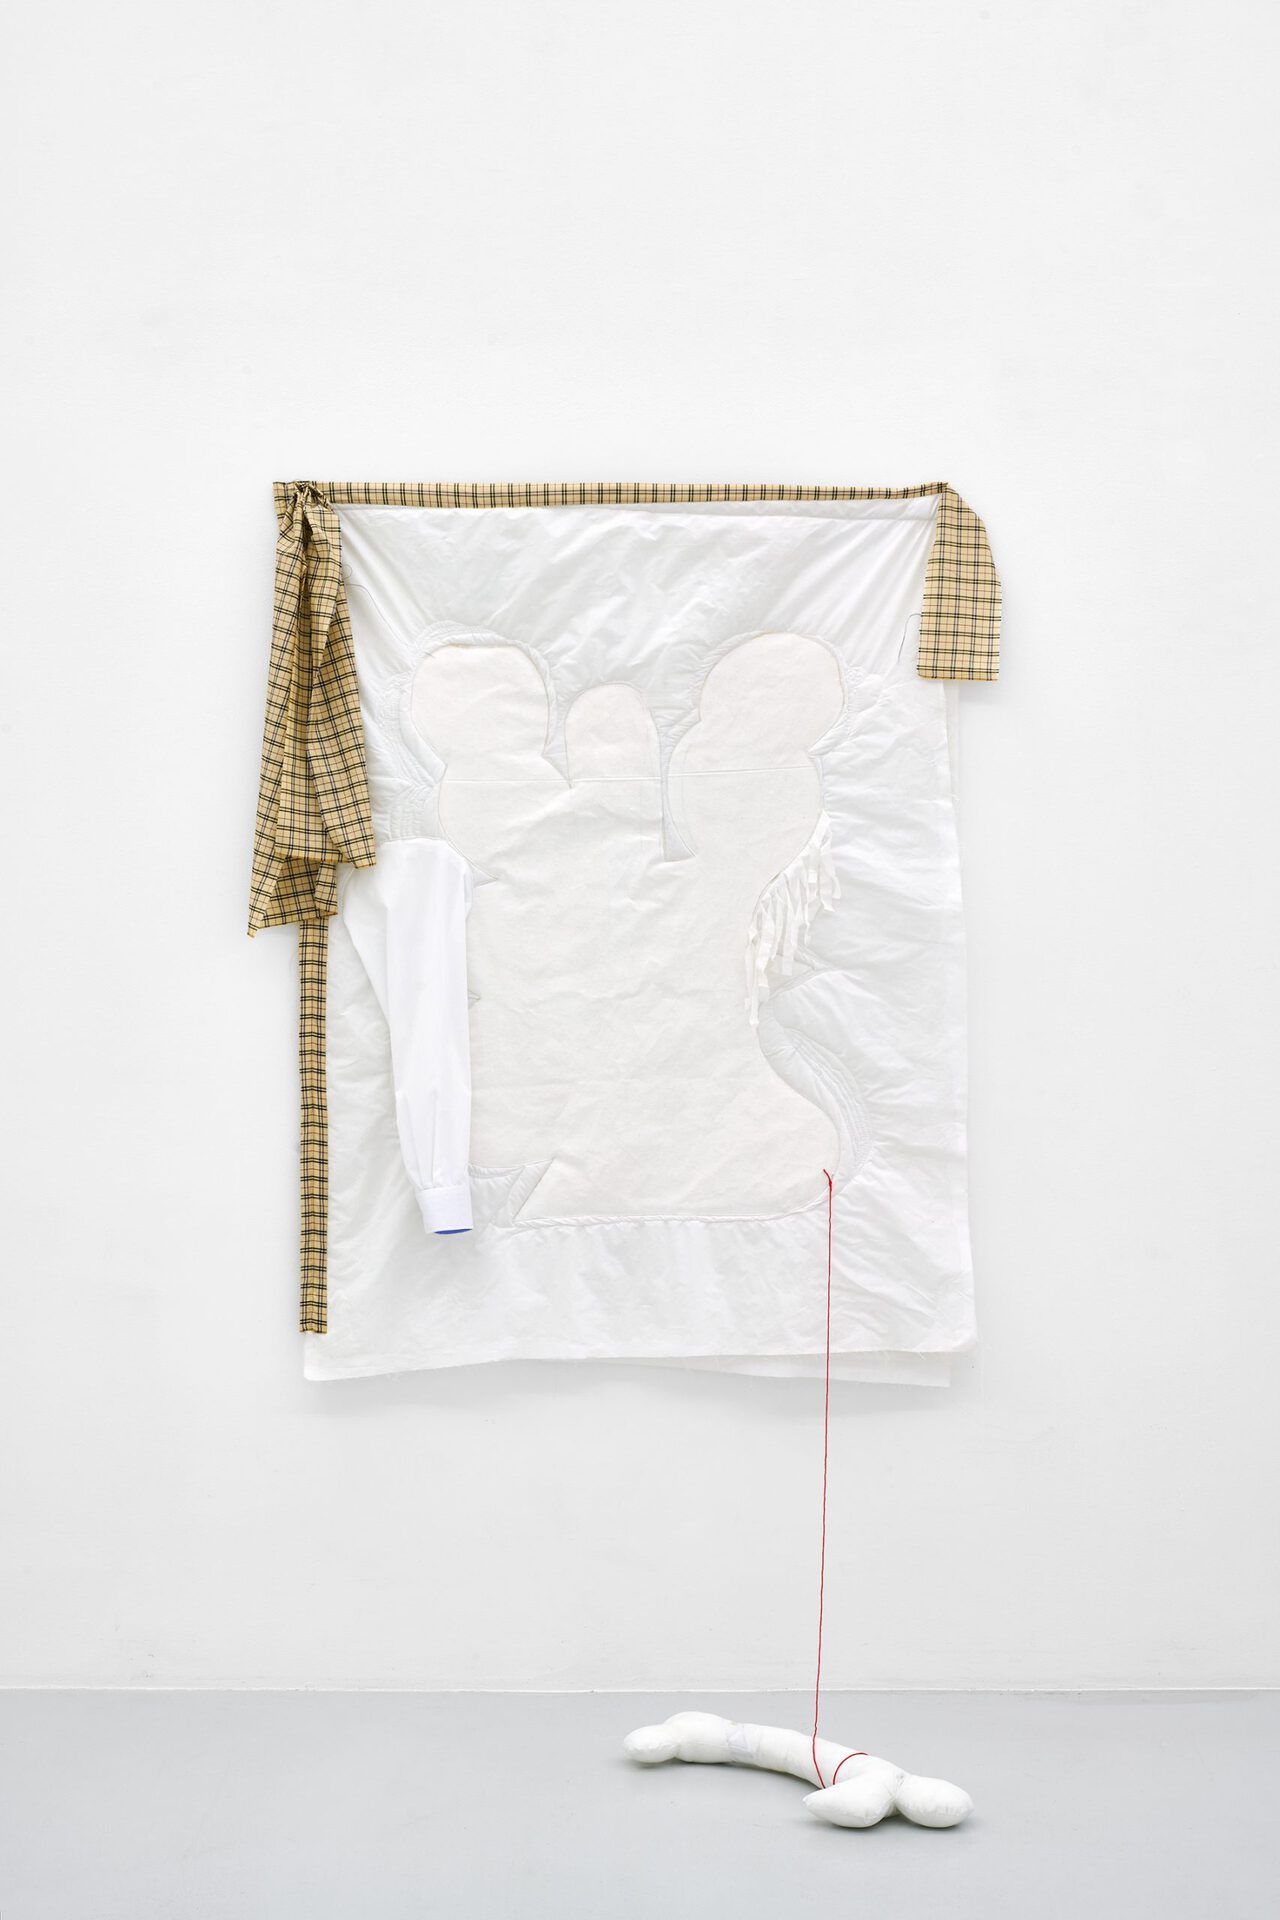 Franca Scholz, Maria with a bone, 2022, cotton textile, canvas, shirt sleeve, embroidery, polyester, overshirt, acrylic, quilted, 148 x 107 cm.